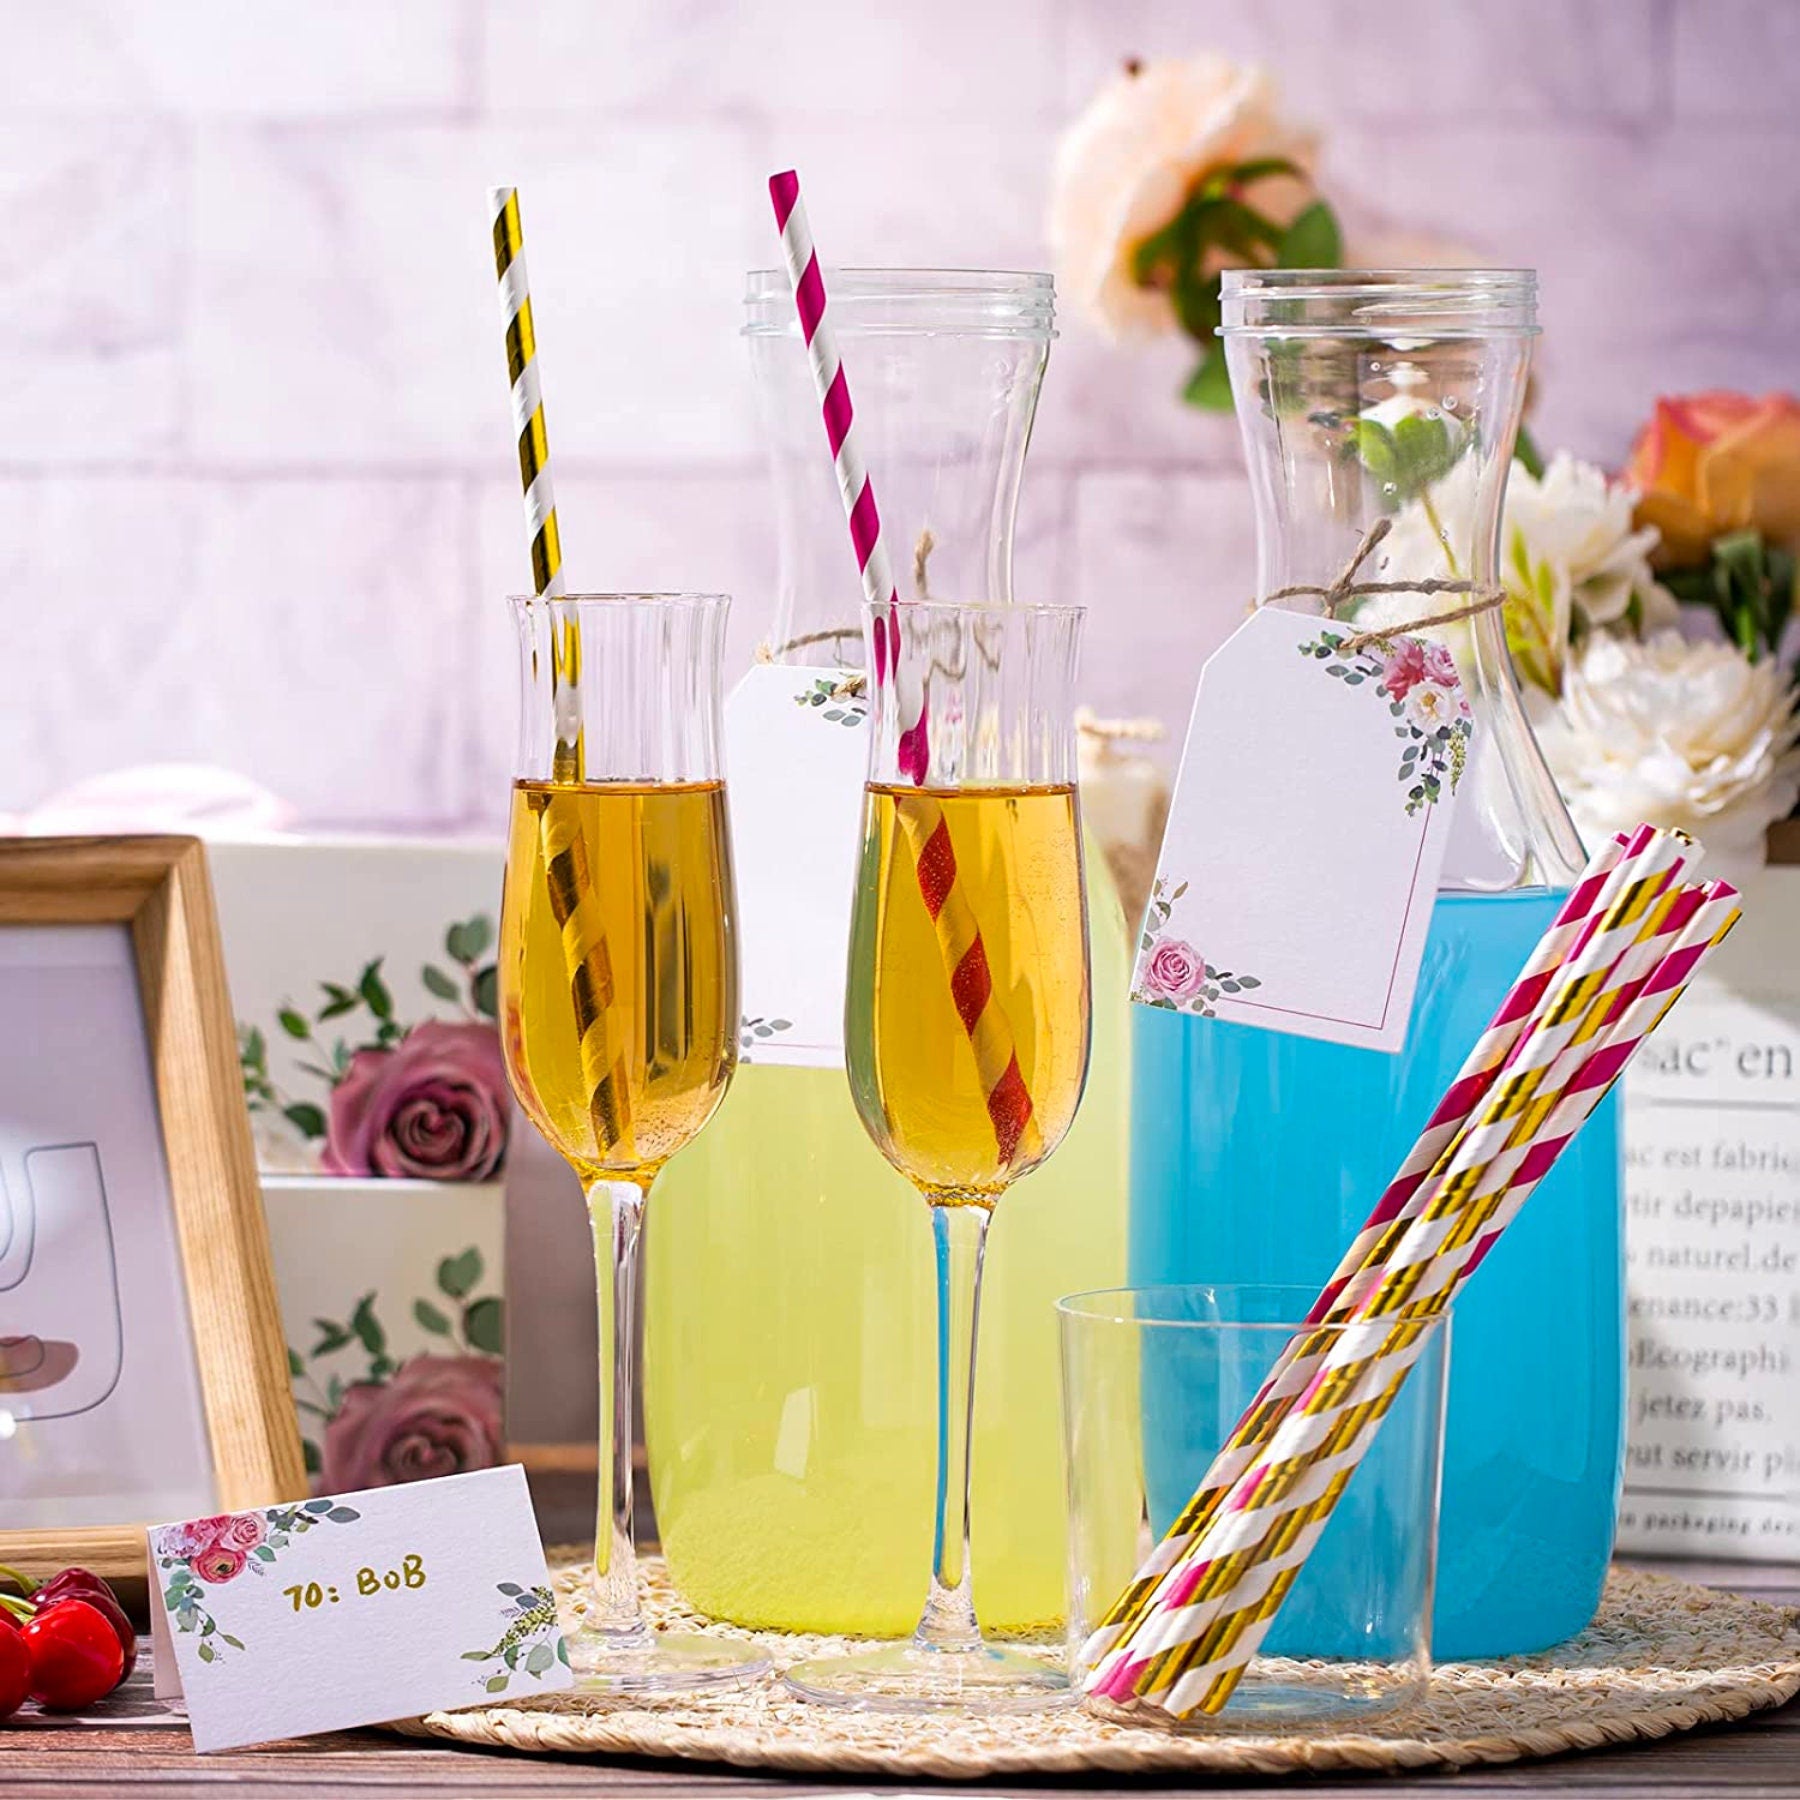 Prestige Mimosa Bar Supplies | Brunch Decorations Kit w/Greenery Mimosa Bar  Sign and Gold Banners. Classy Bridal Shower Decorations, Momosabar Baby